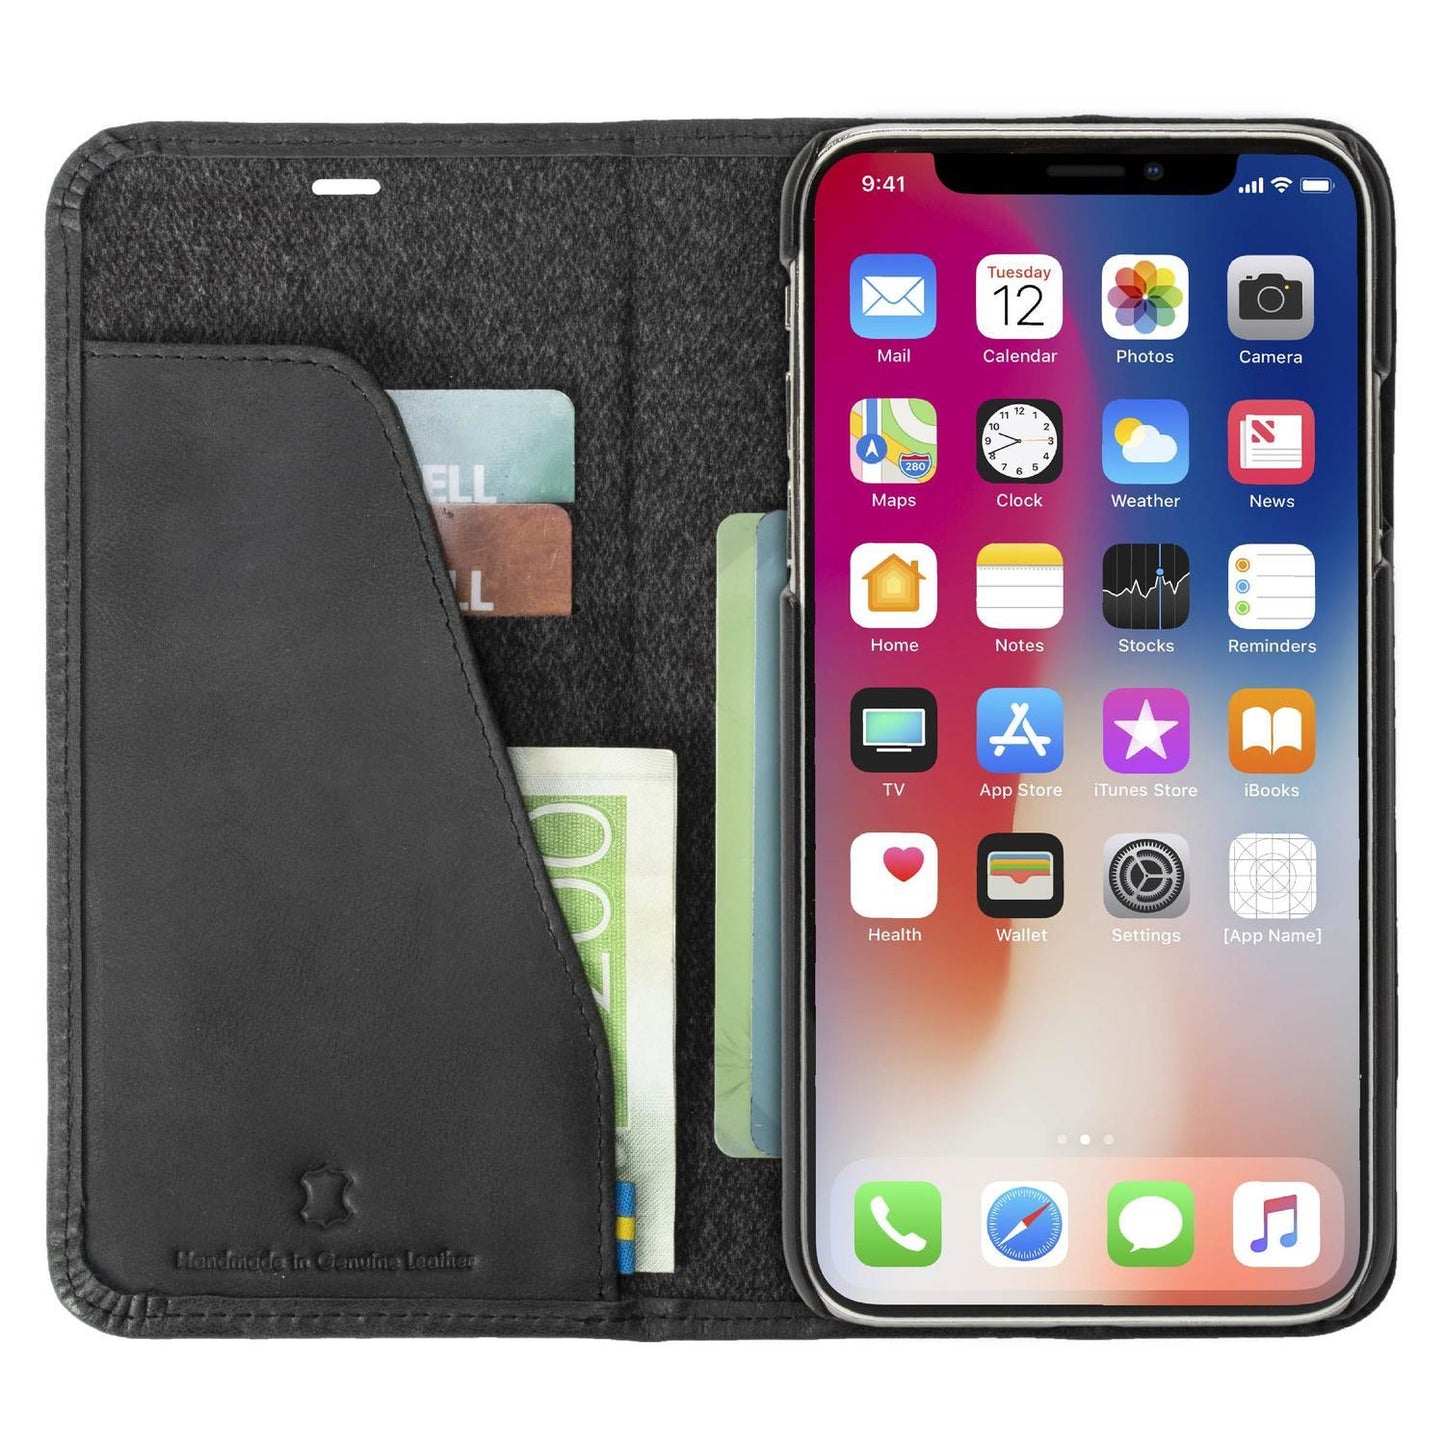 Sunne 4 Card Folio Wallet for iPhone X / XS